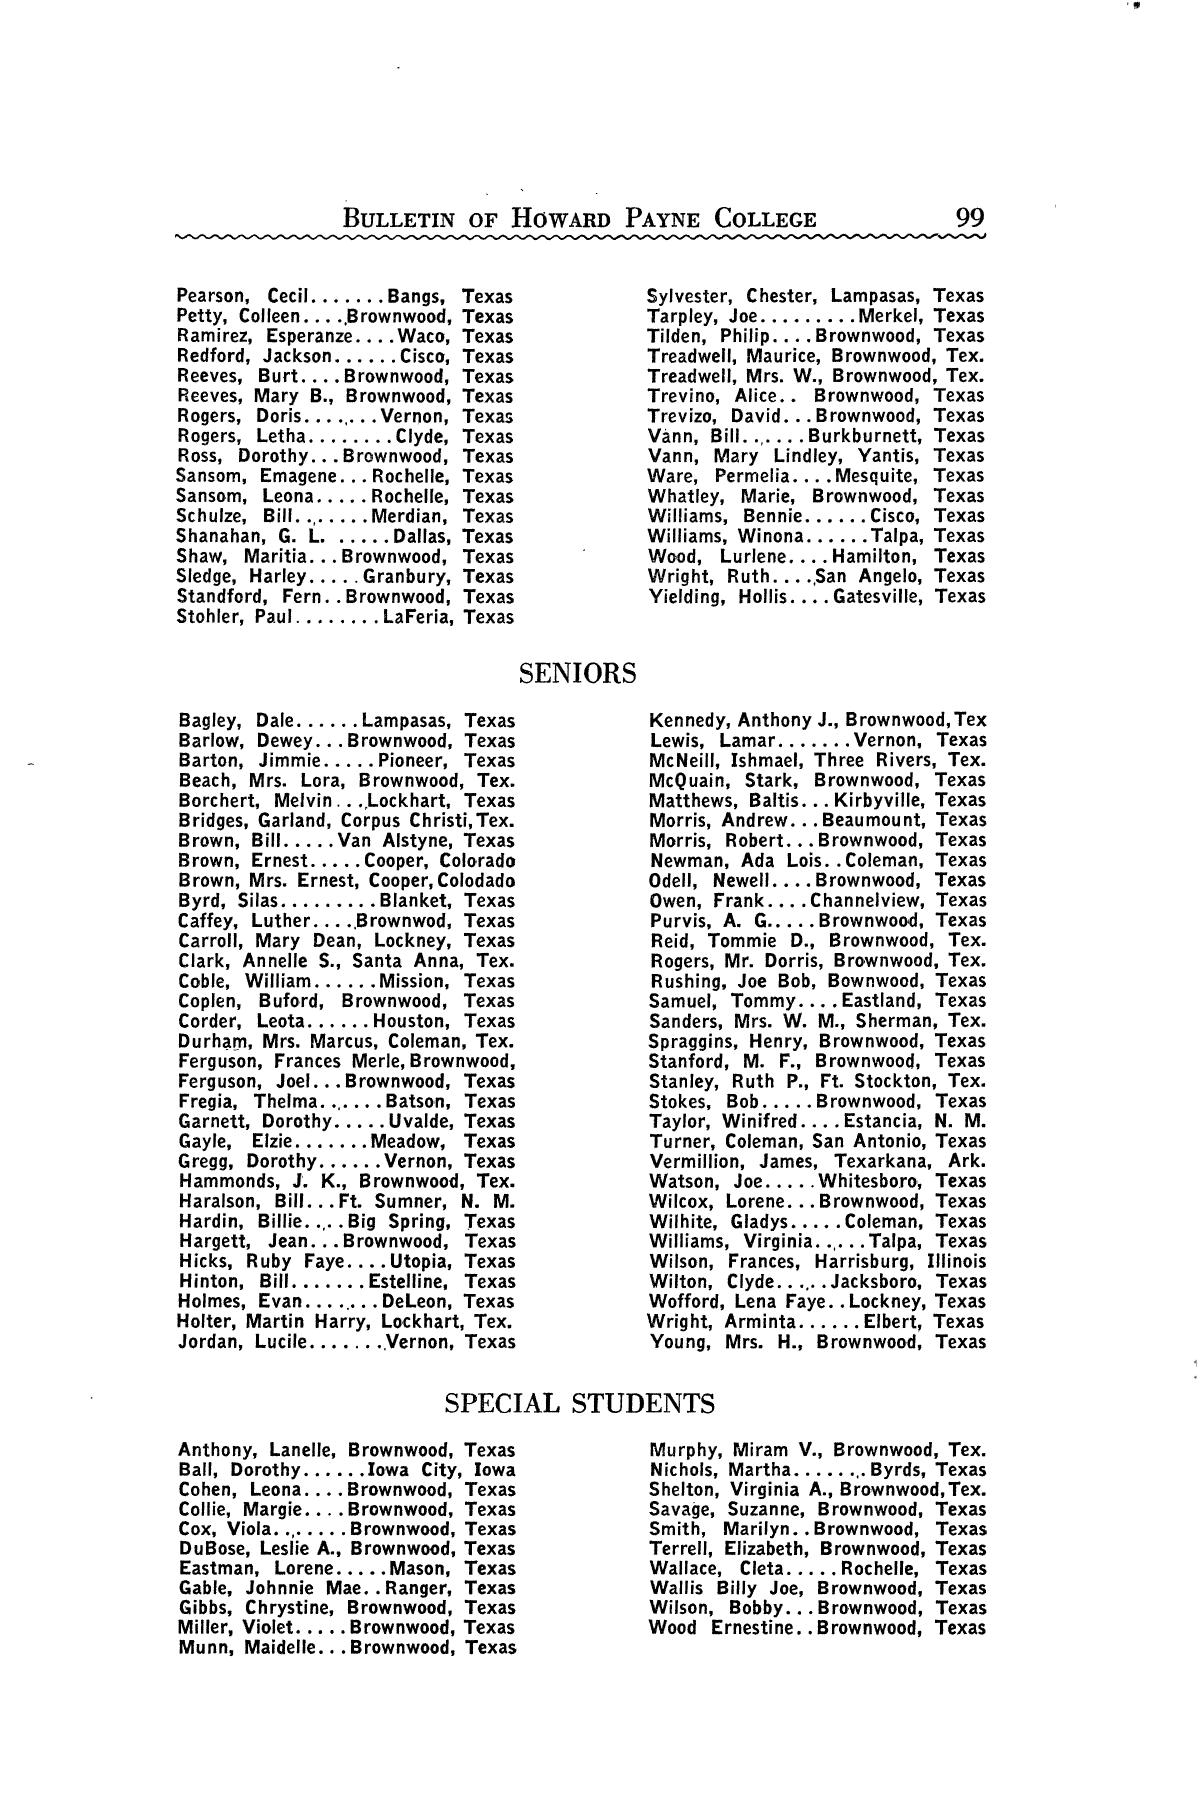 Catalogue of Howard Payne College, 1942-1943